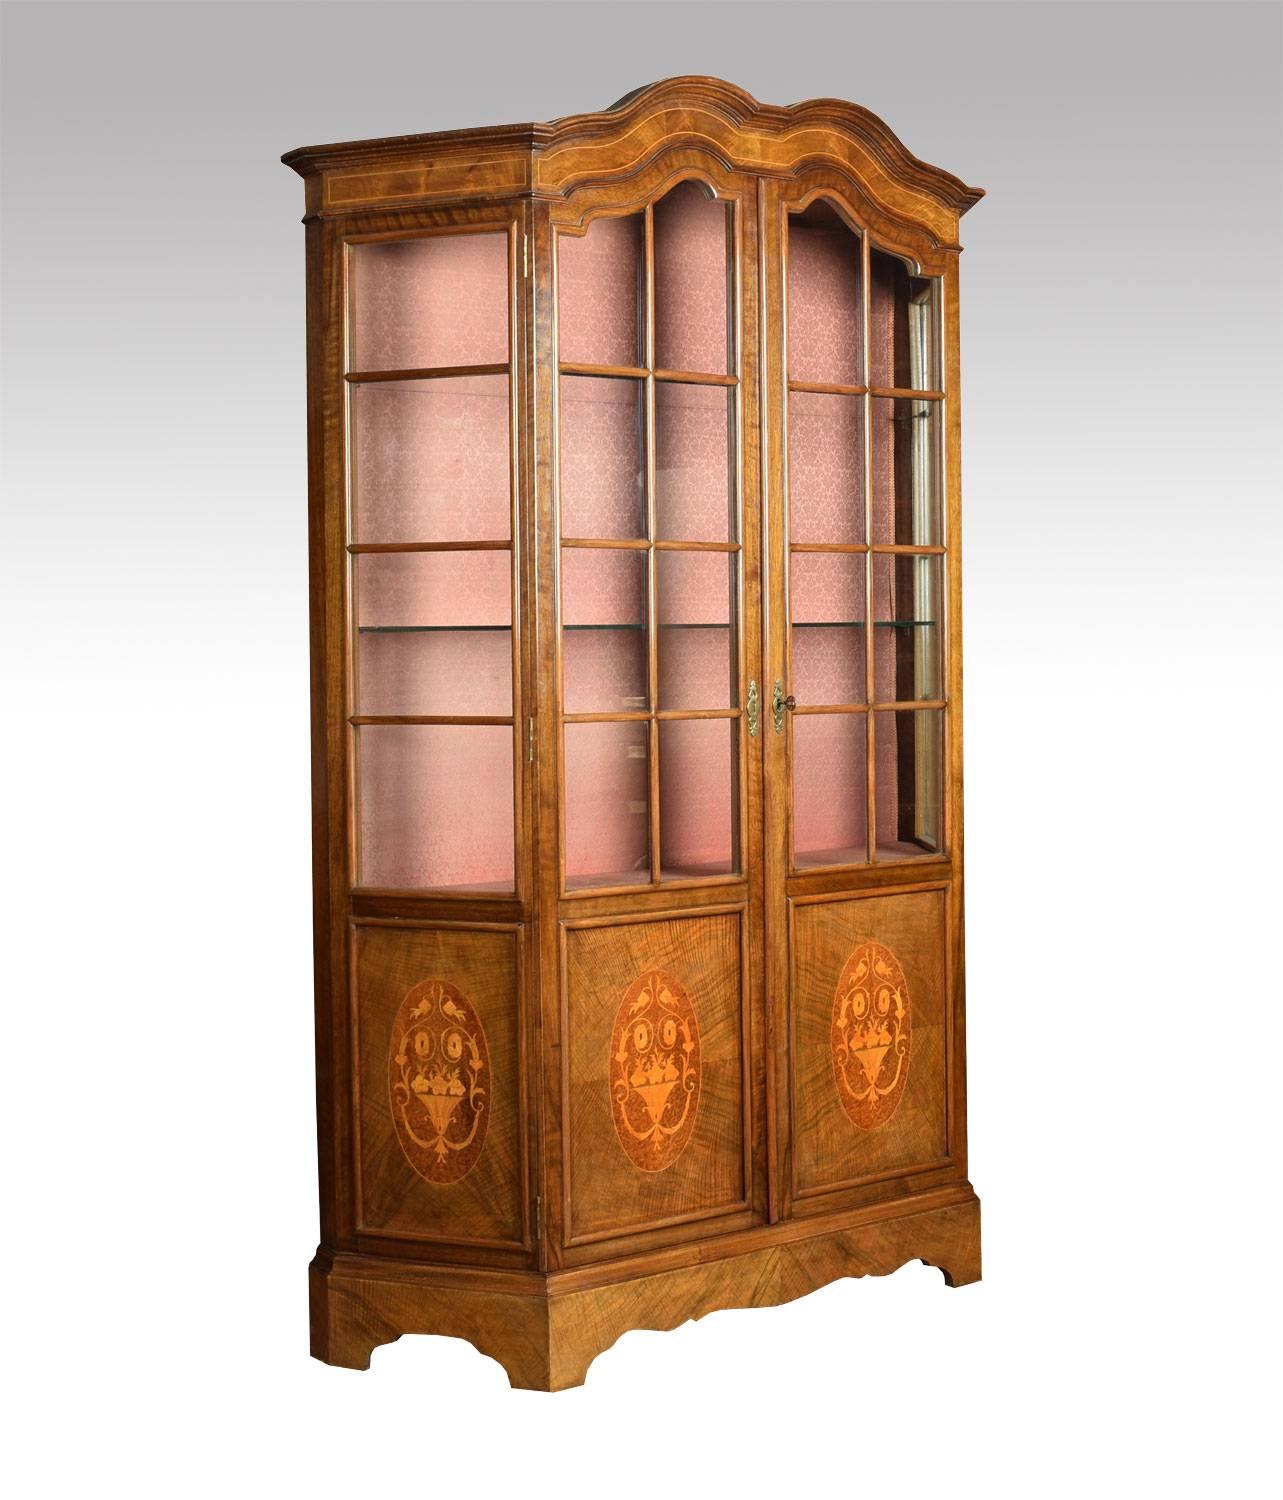 Walnut display cabinet the arched top over two central doors opening to reveal serviceable upholstered interior with two glazed shelves. Flanked by unusual concaved glass panelled sides the base section with oval inlaid panels all raised up shaped